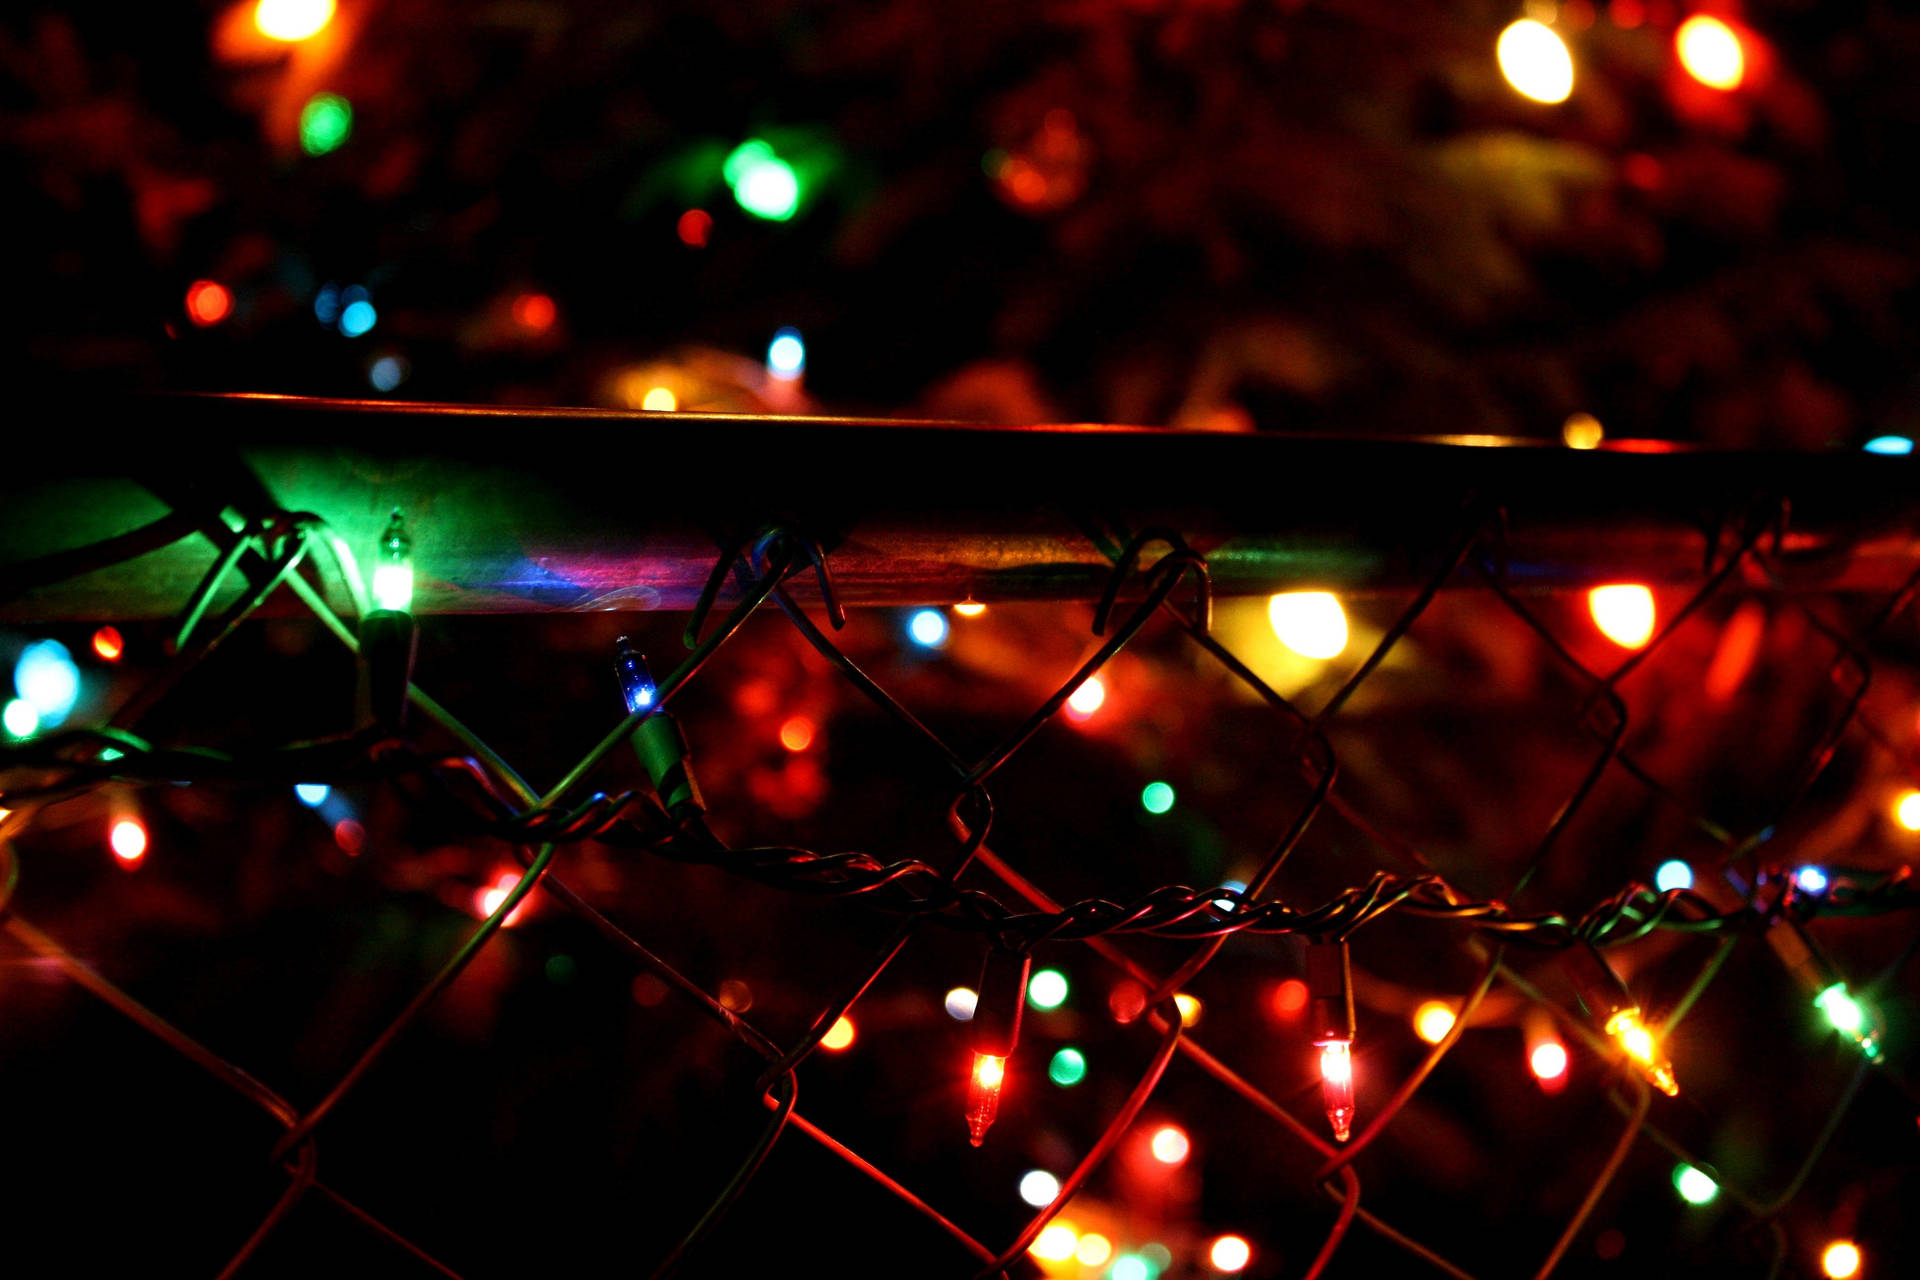 Illuminate your home this holiday season with beautiful Christmas lights! Wallpaper